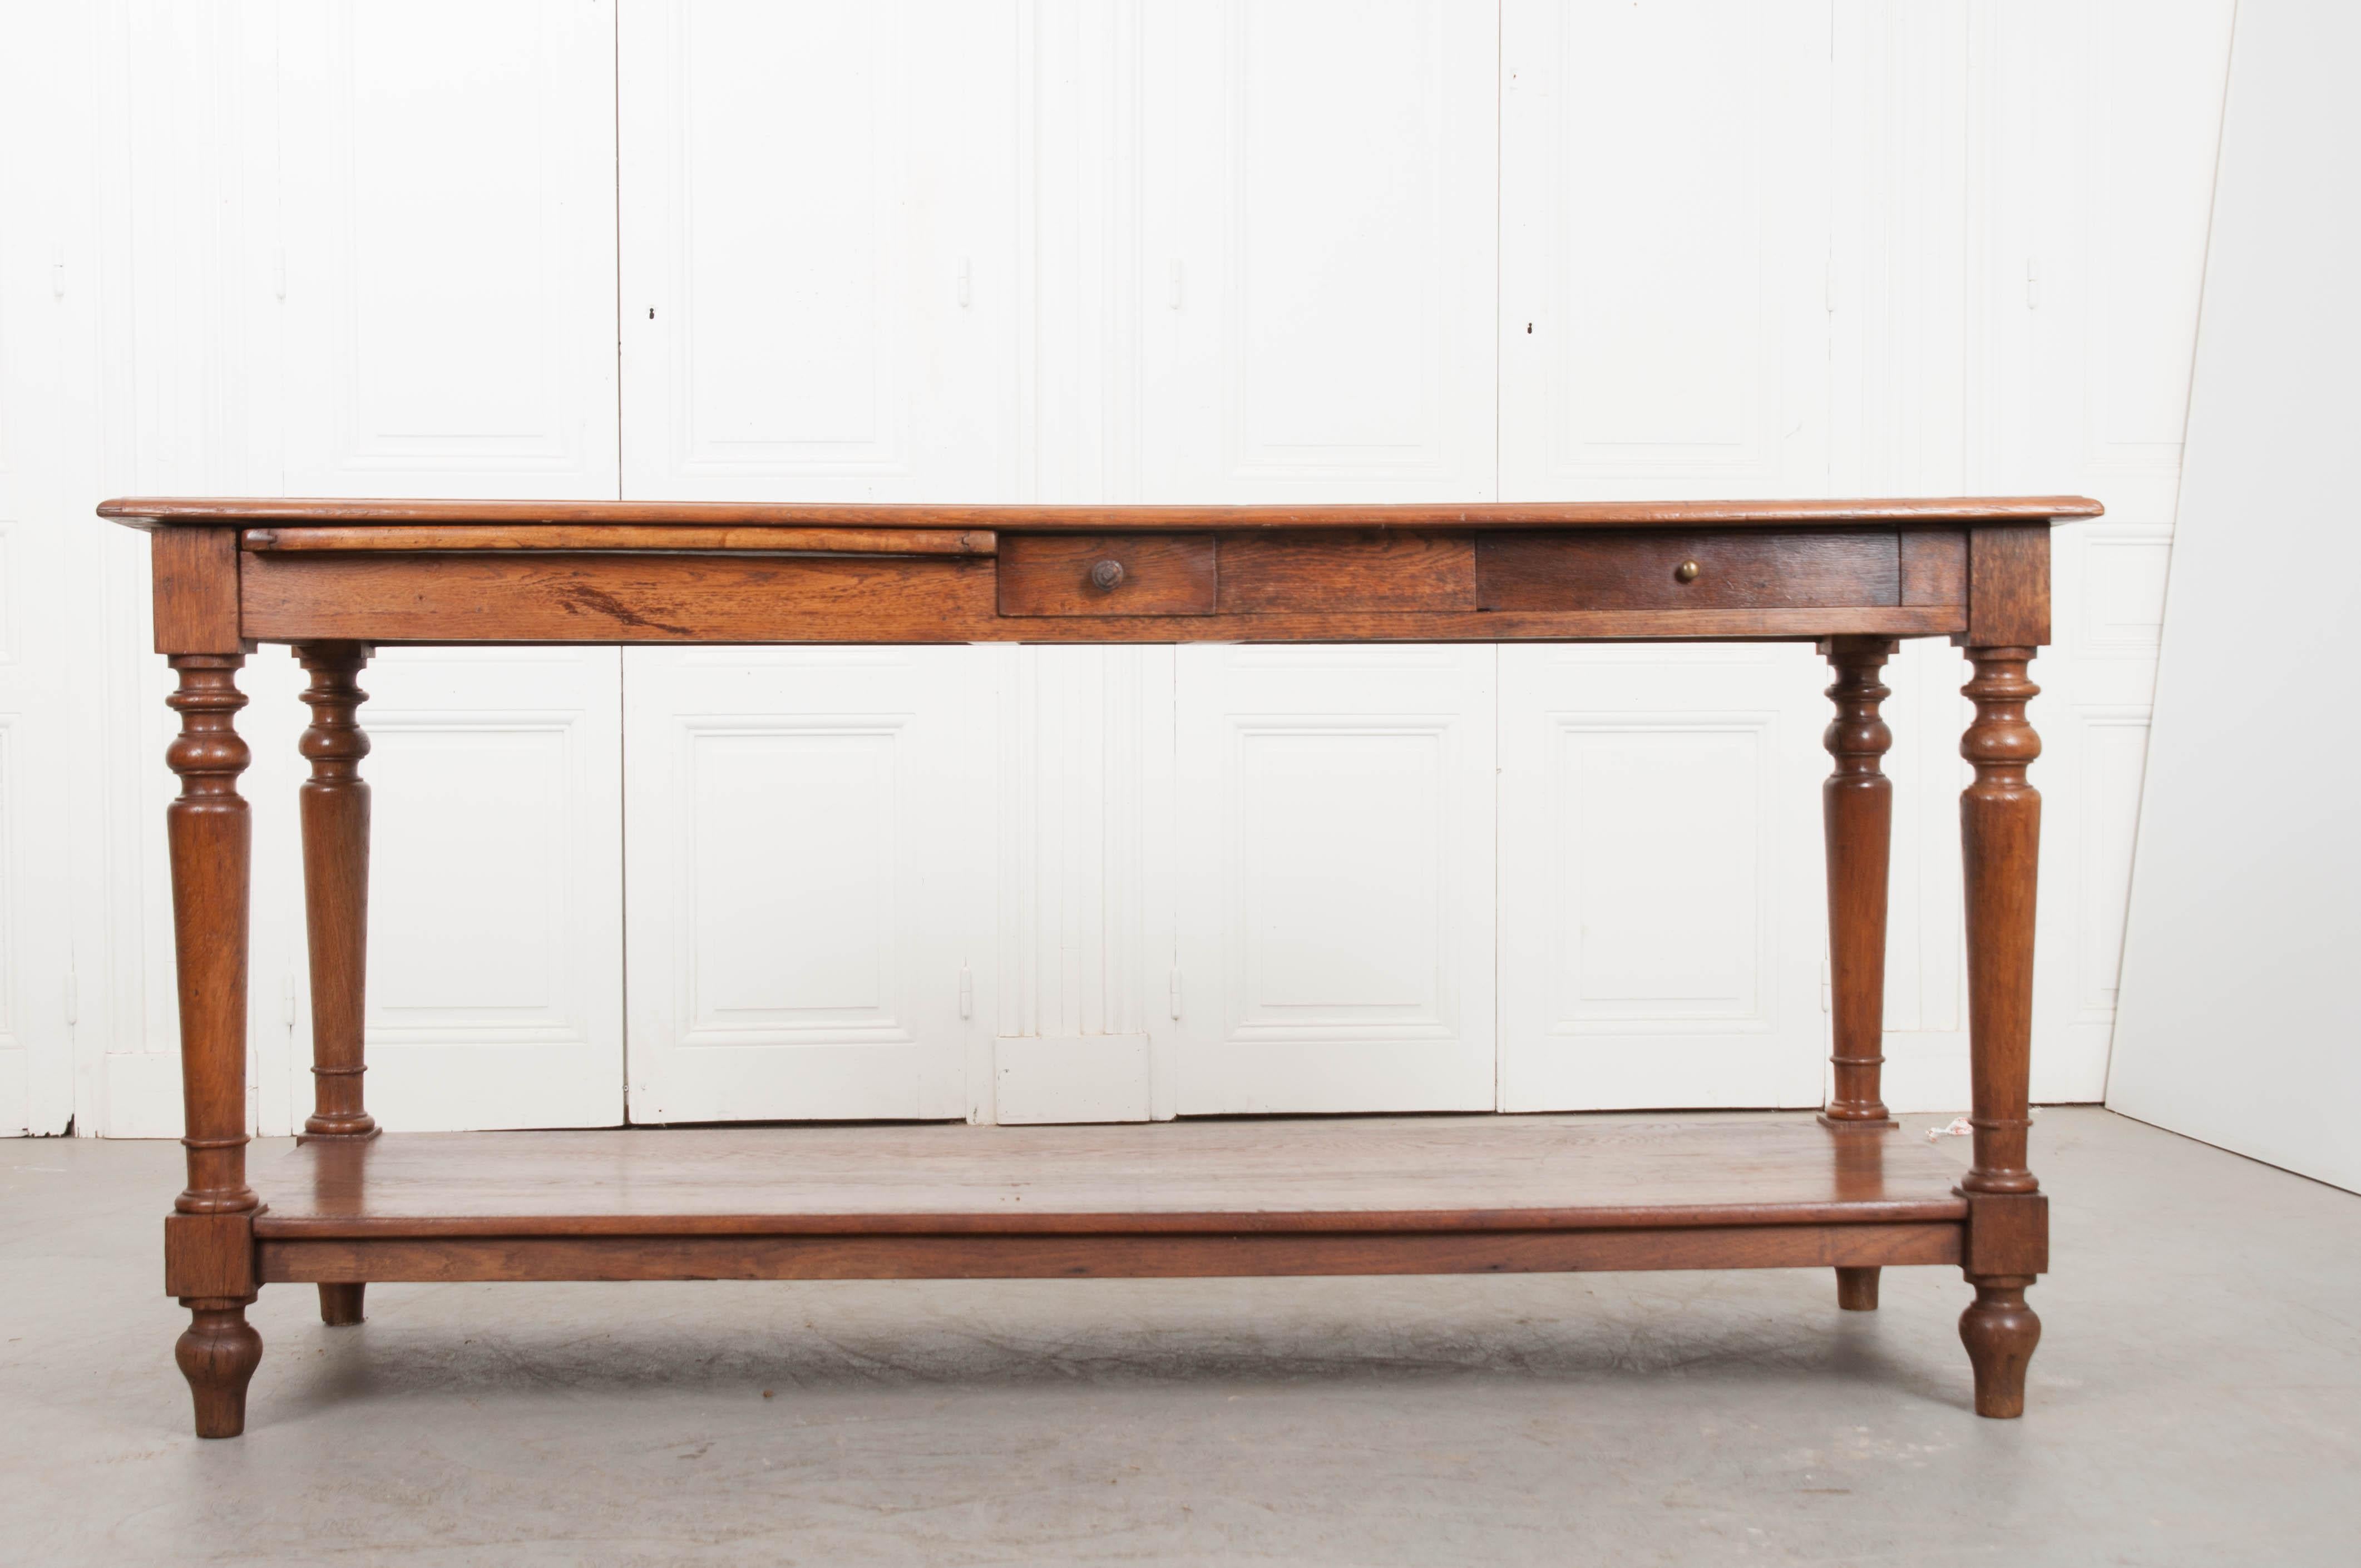 Beautiful, long graining enrich the already lustrous oak surface of this amazing French drapers table. Originally used by tailors and seamstresses, these lengthy tables would provide a work surface long enough for yards of fabric to be laid out and